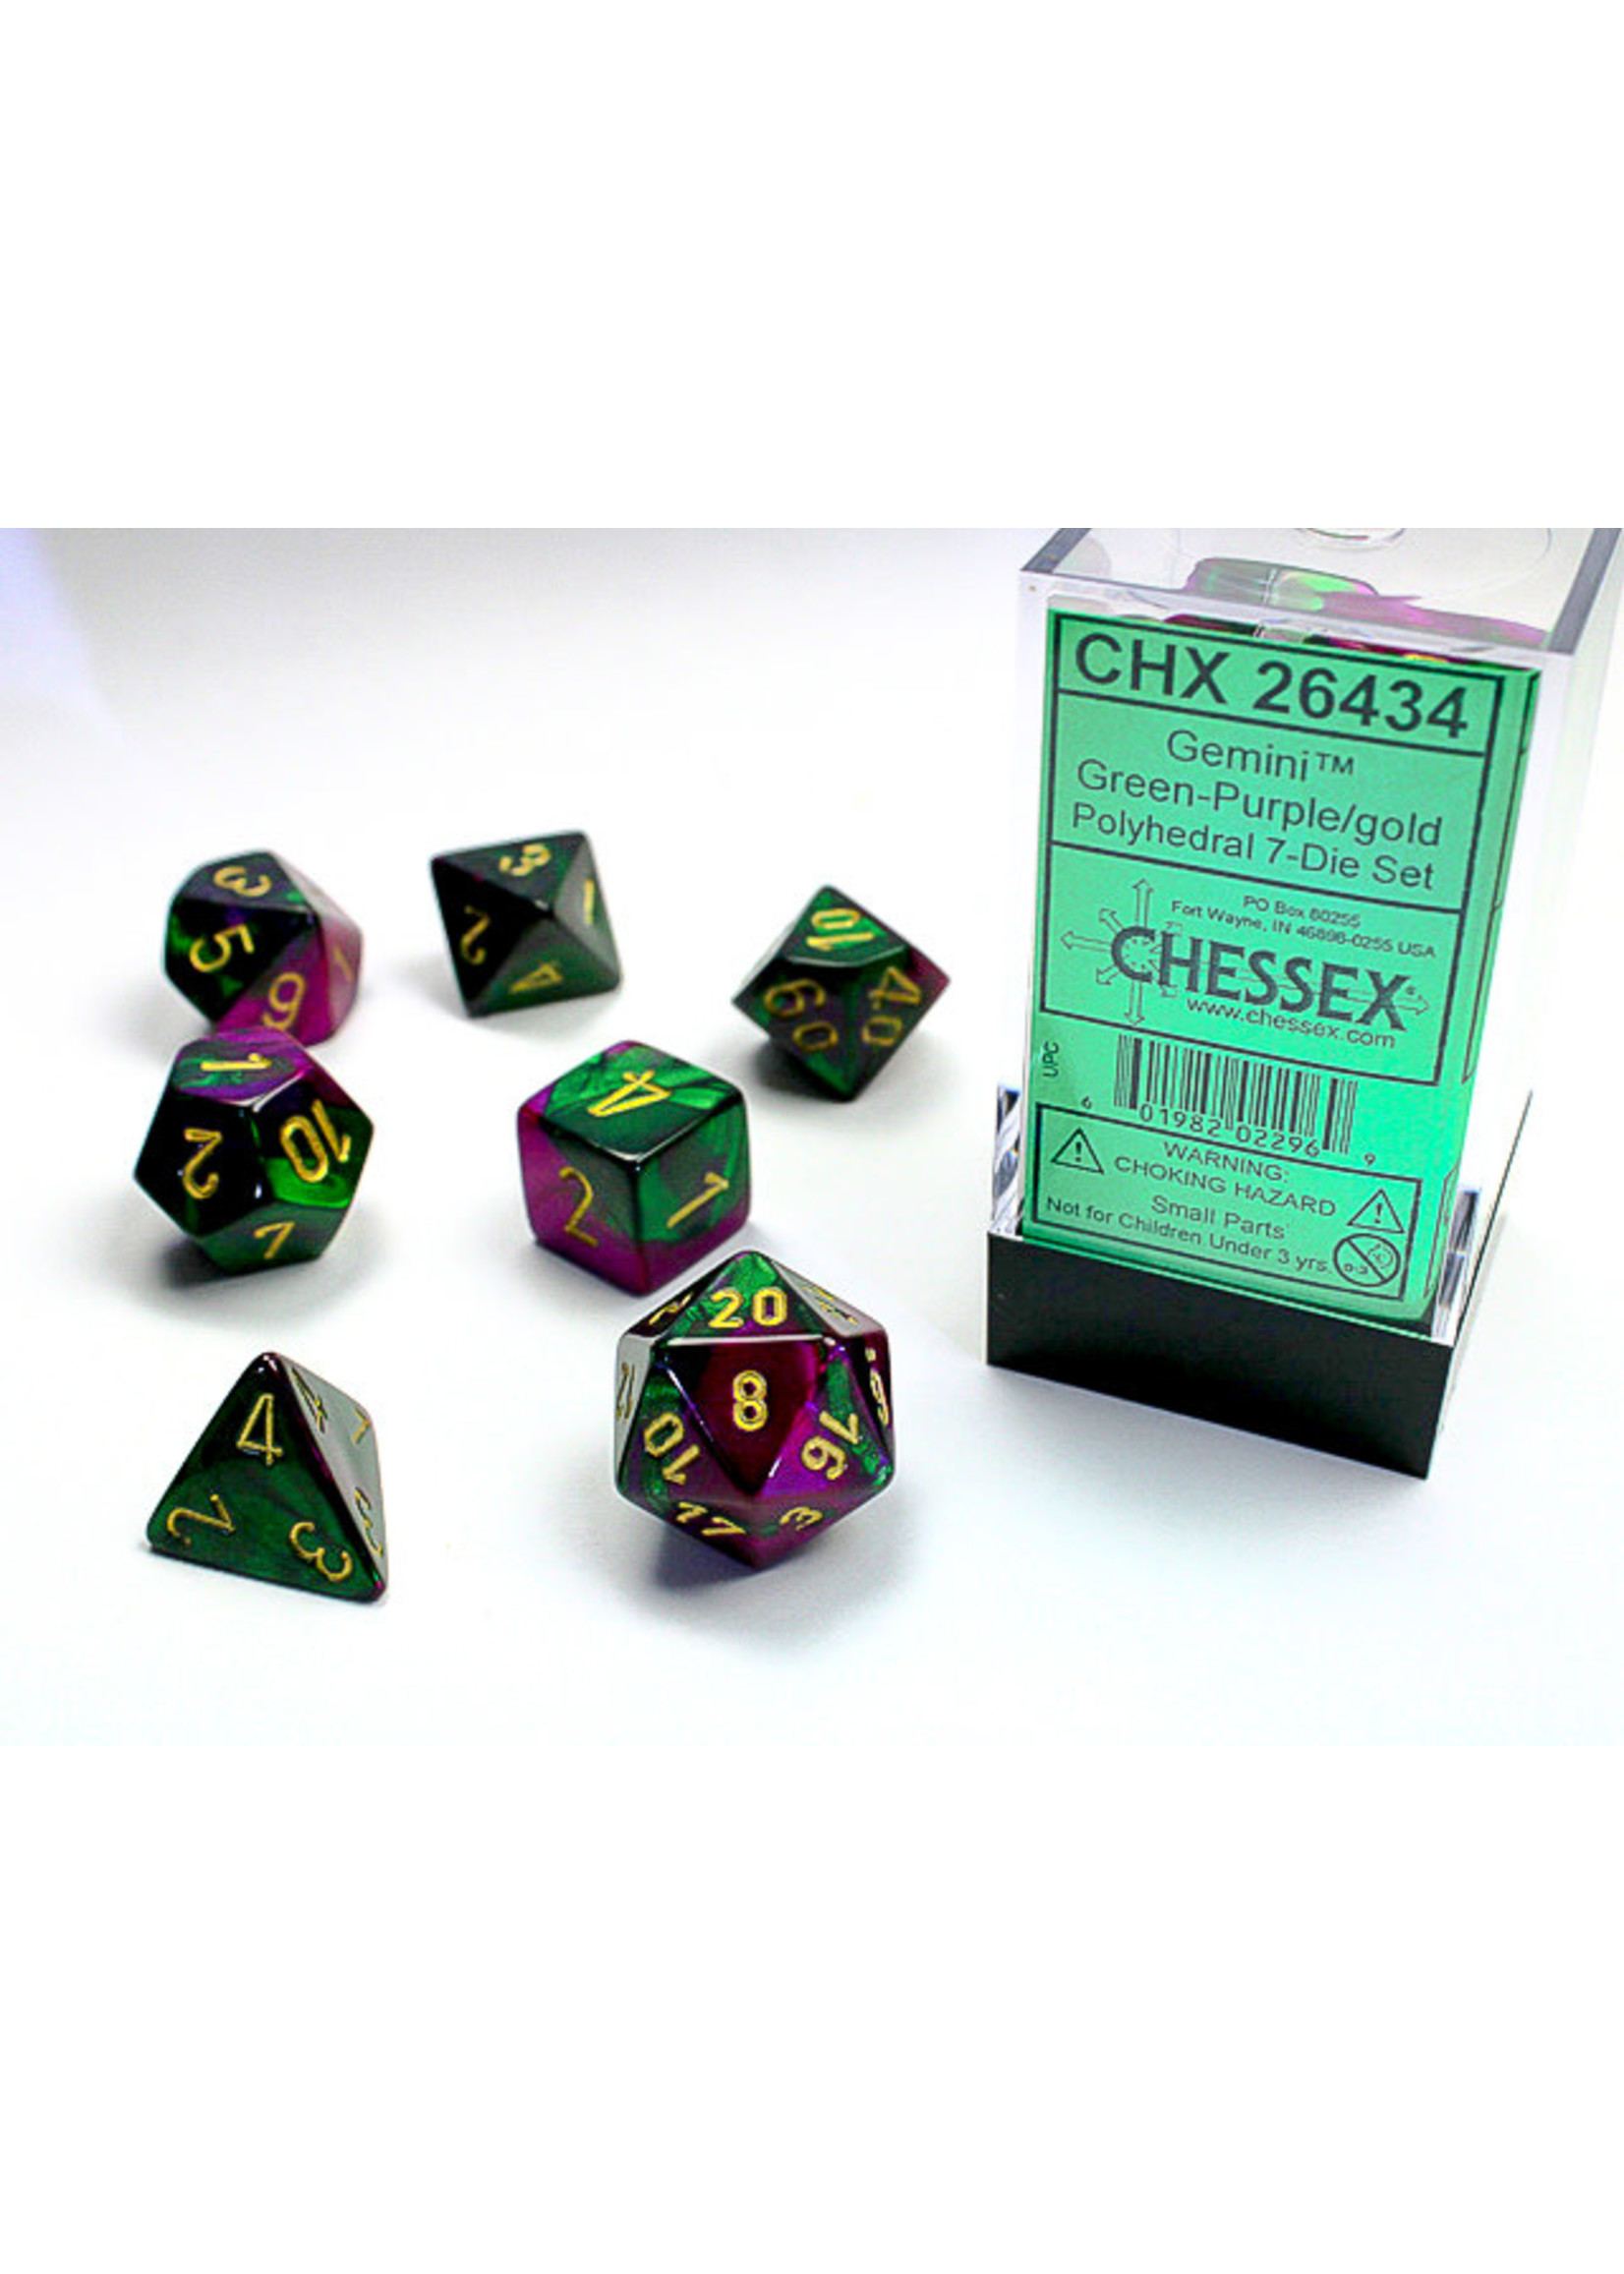 Chessex Gemini Green-Purple/gold- Set of 7 Polyhedral Dice by Chessex